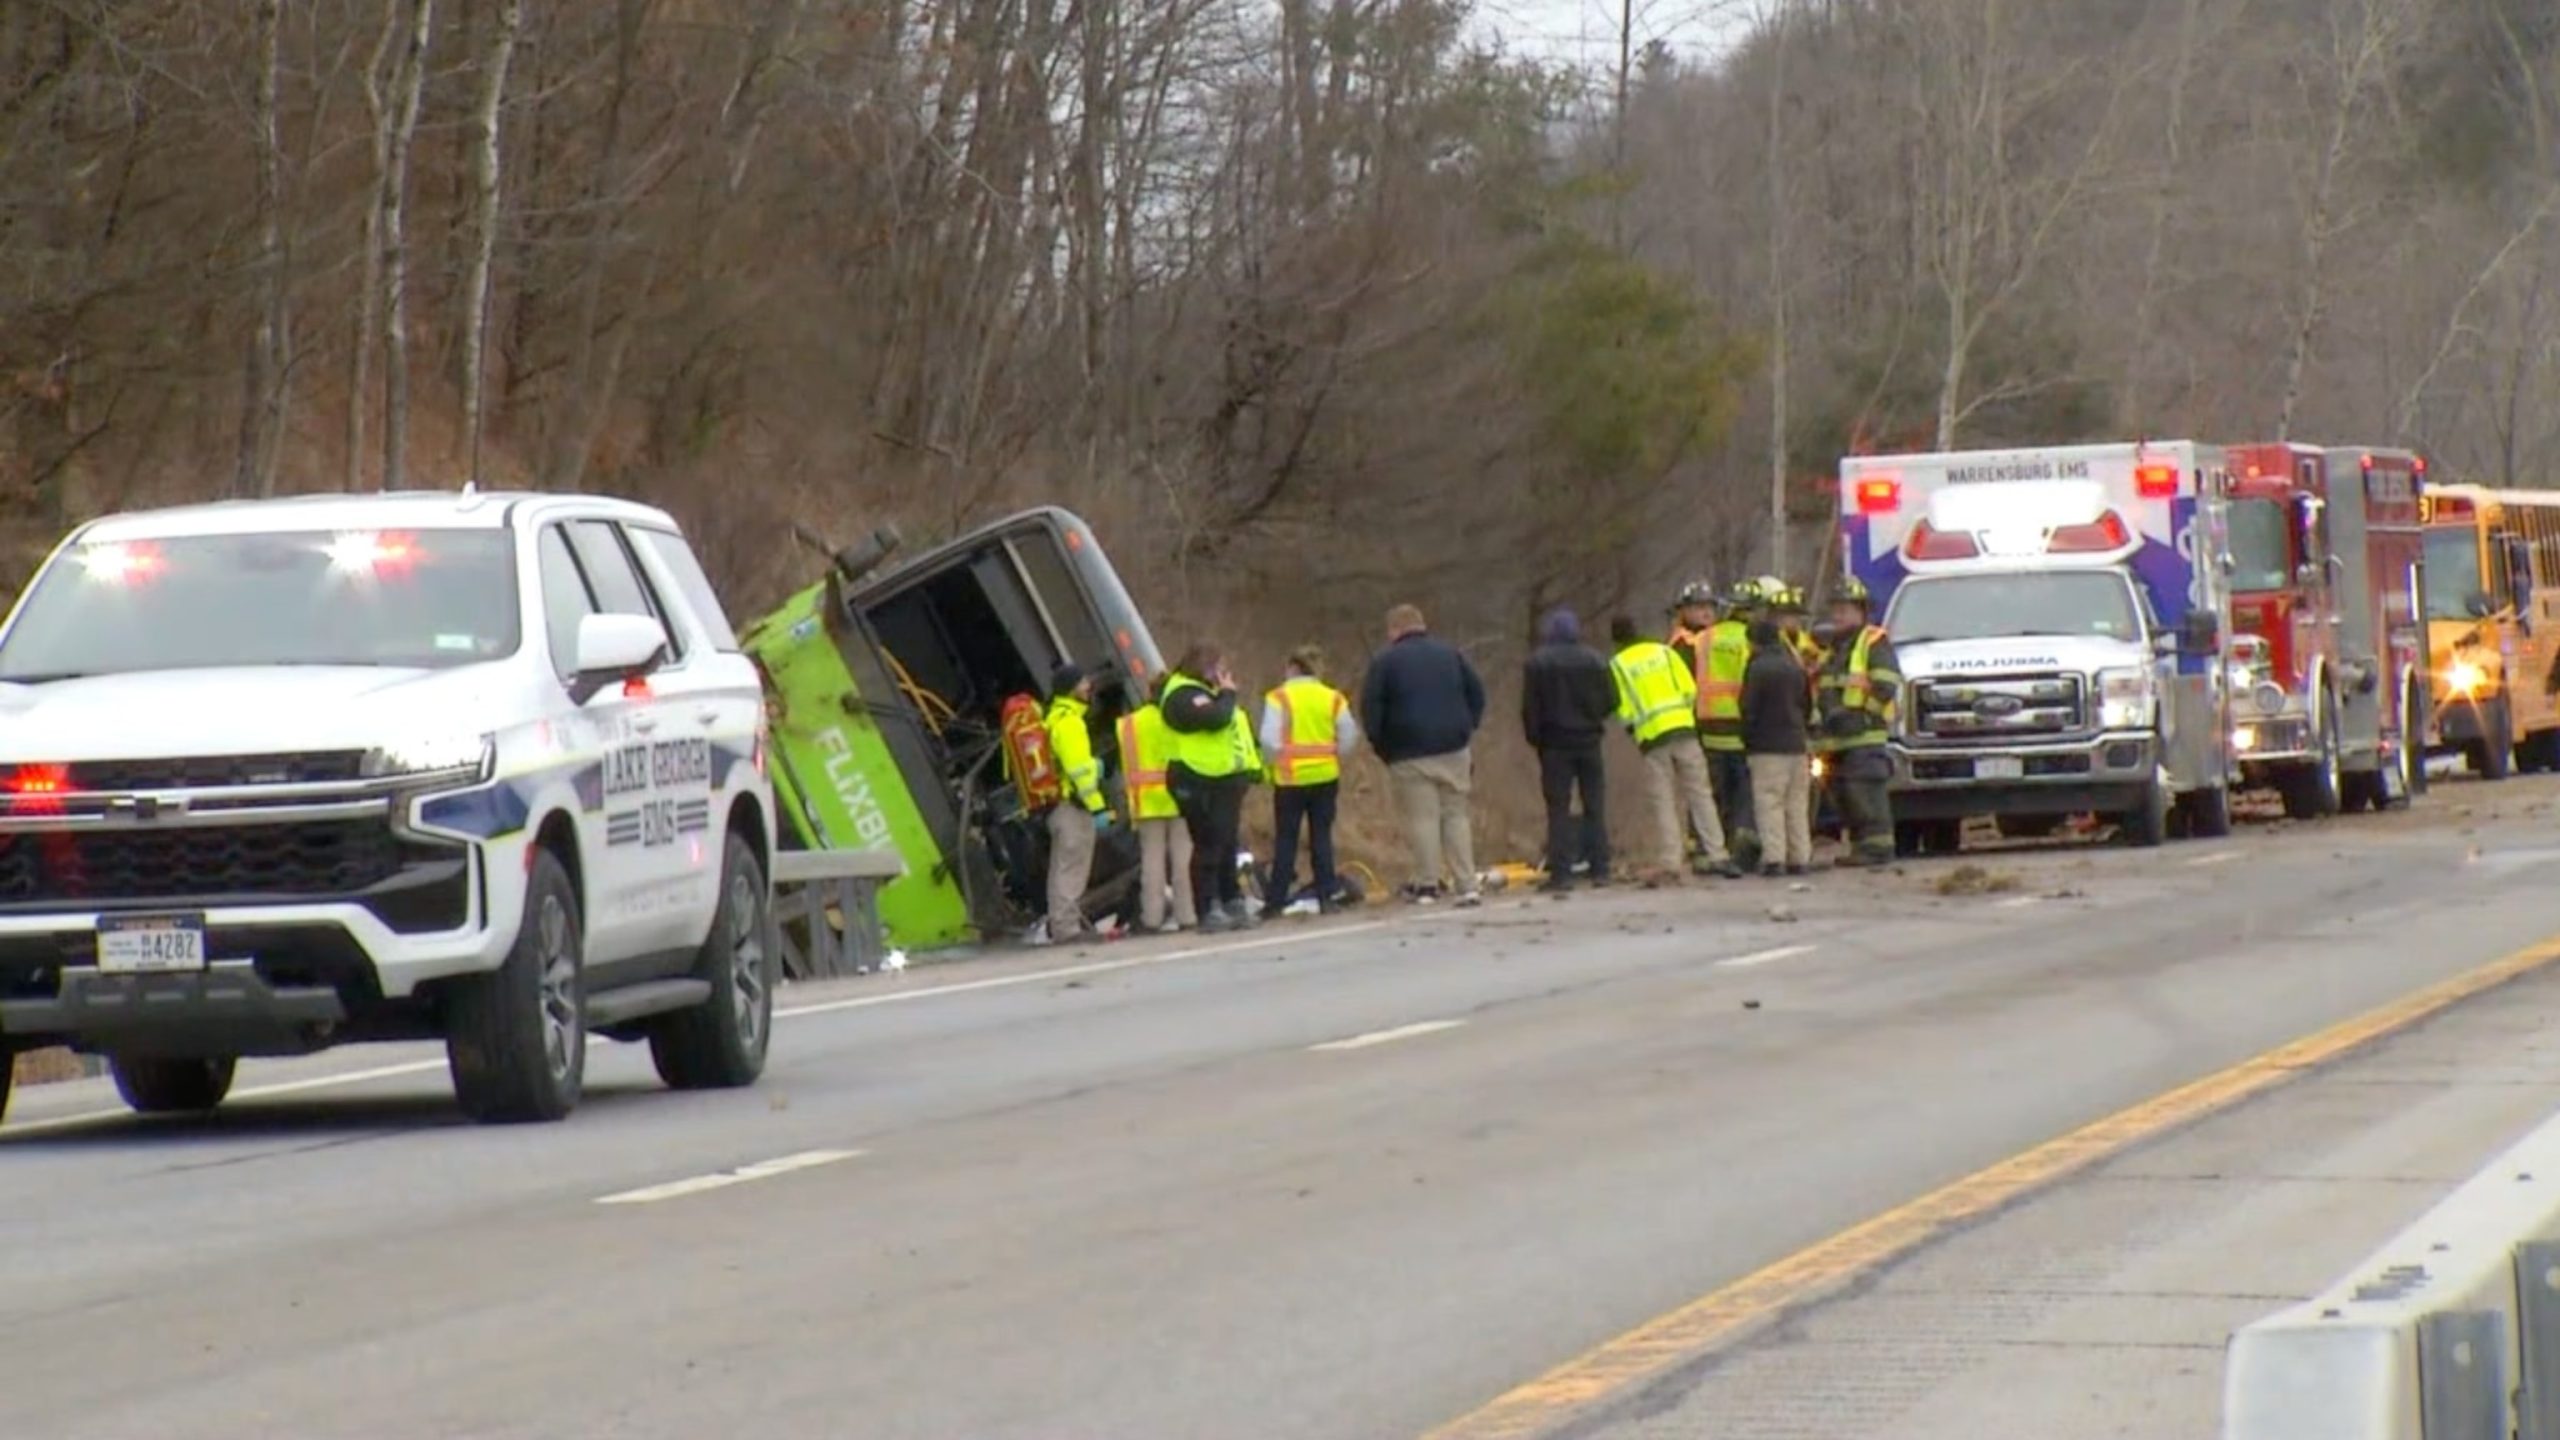 One fatality and nearly twenty-four injuries reported following a tour bus rollover on upstate New York highway